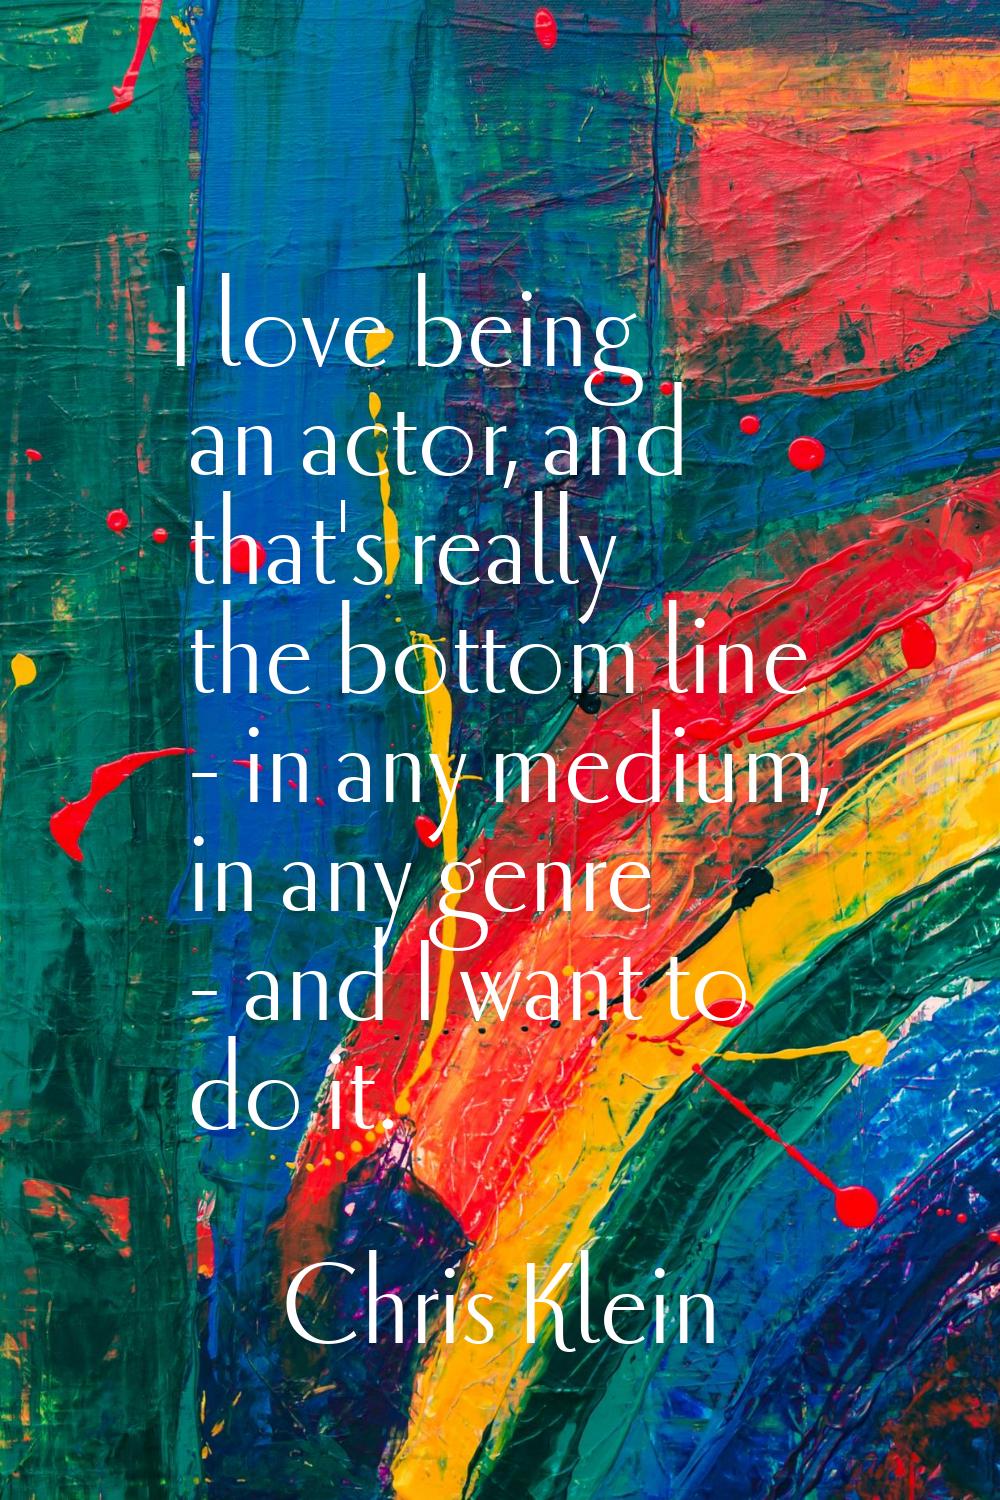 I love being an actor, and that's really the bottom line - in any medium, in any genre - and I want